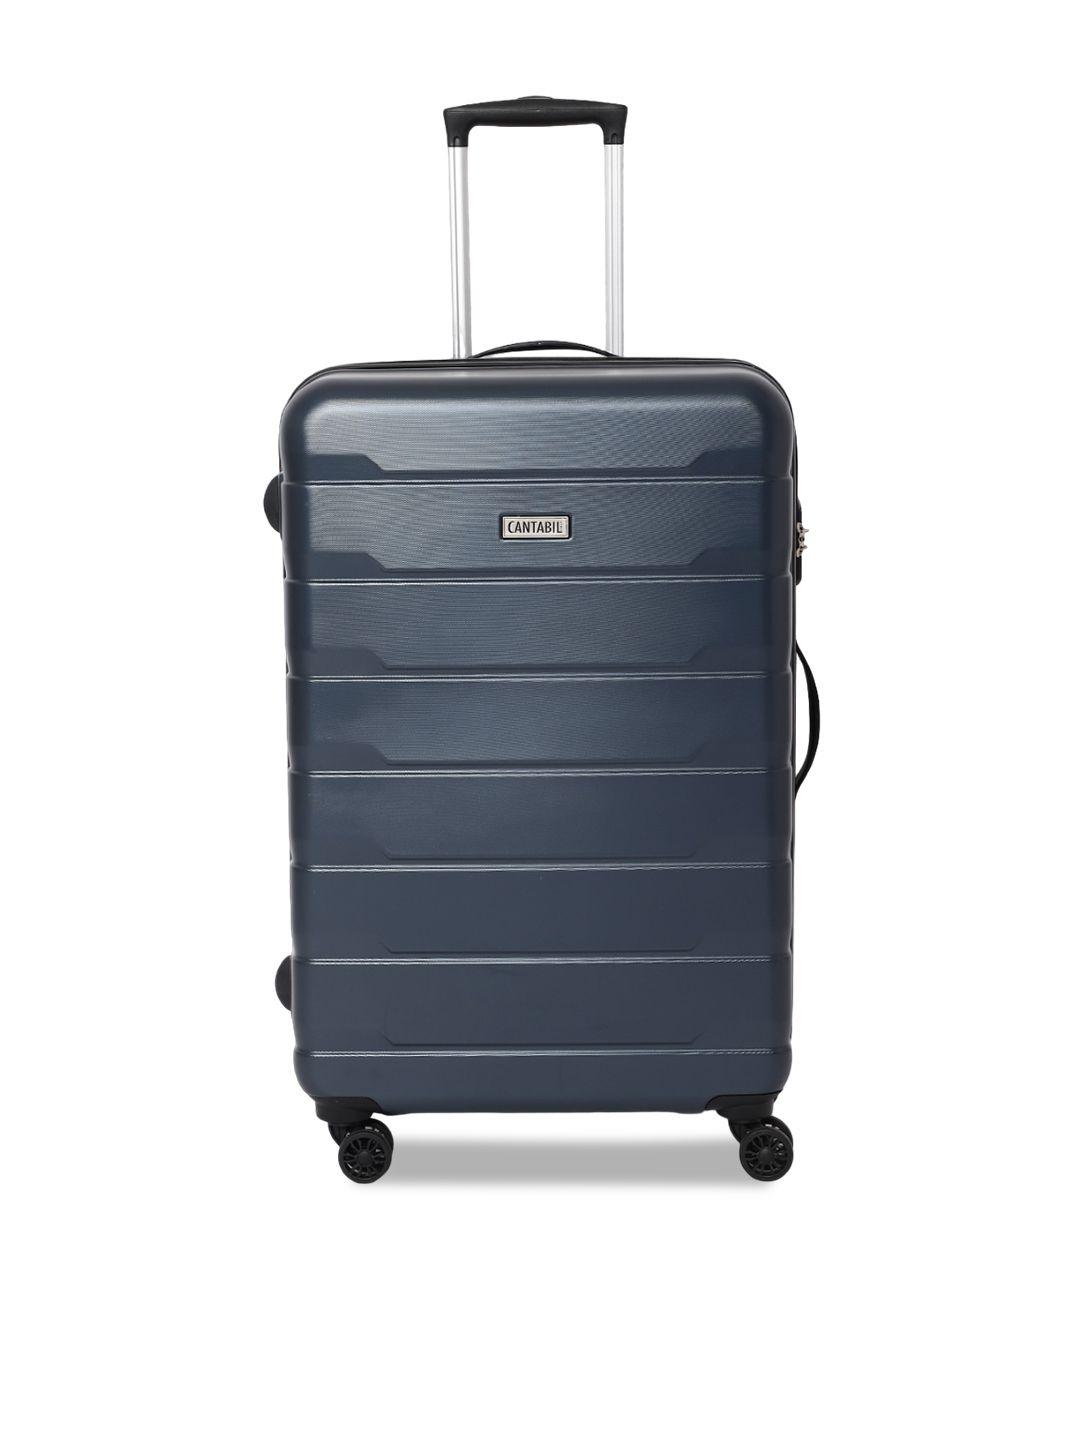 cantabil textured hard-sided large trolley suitcase